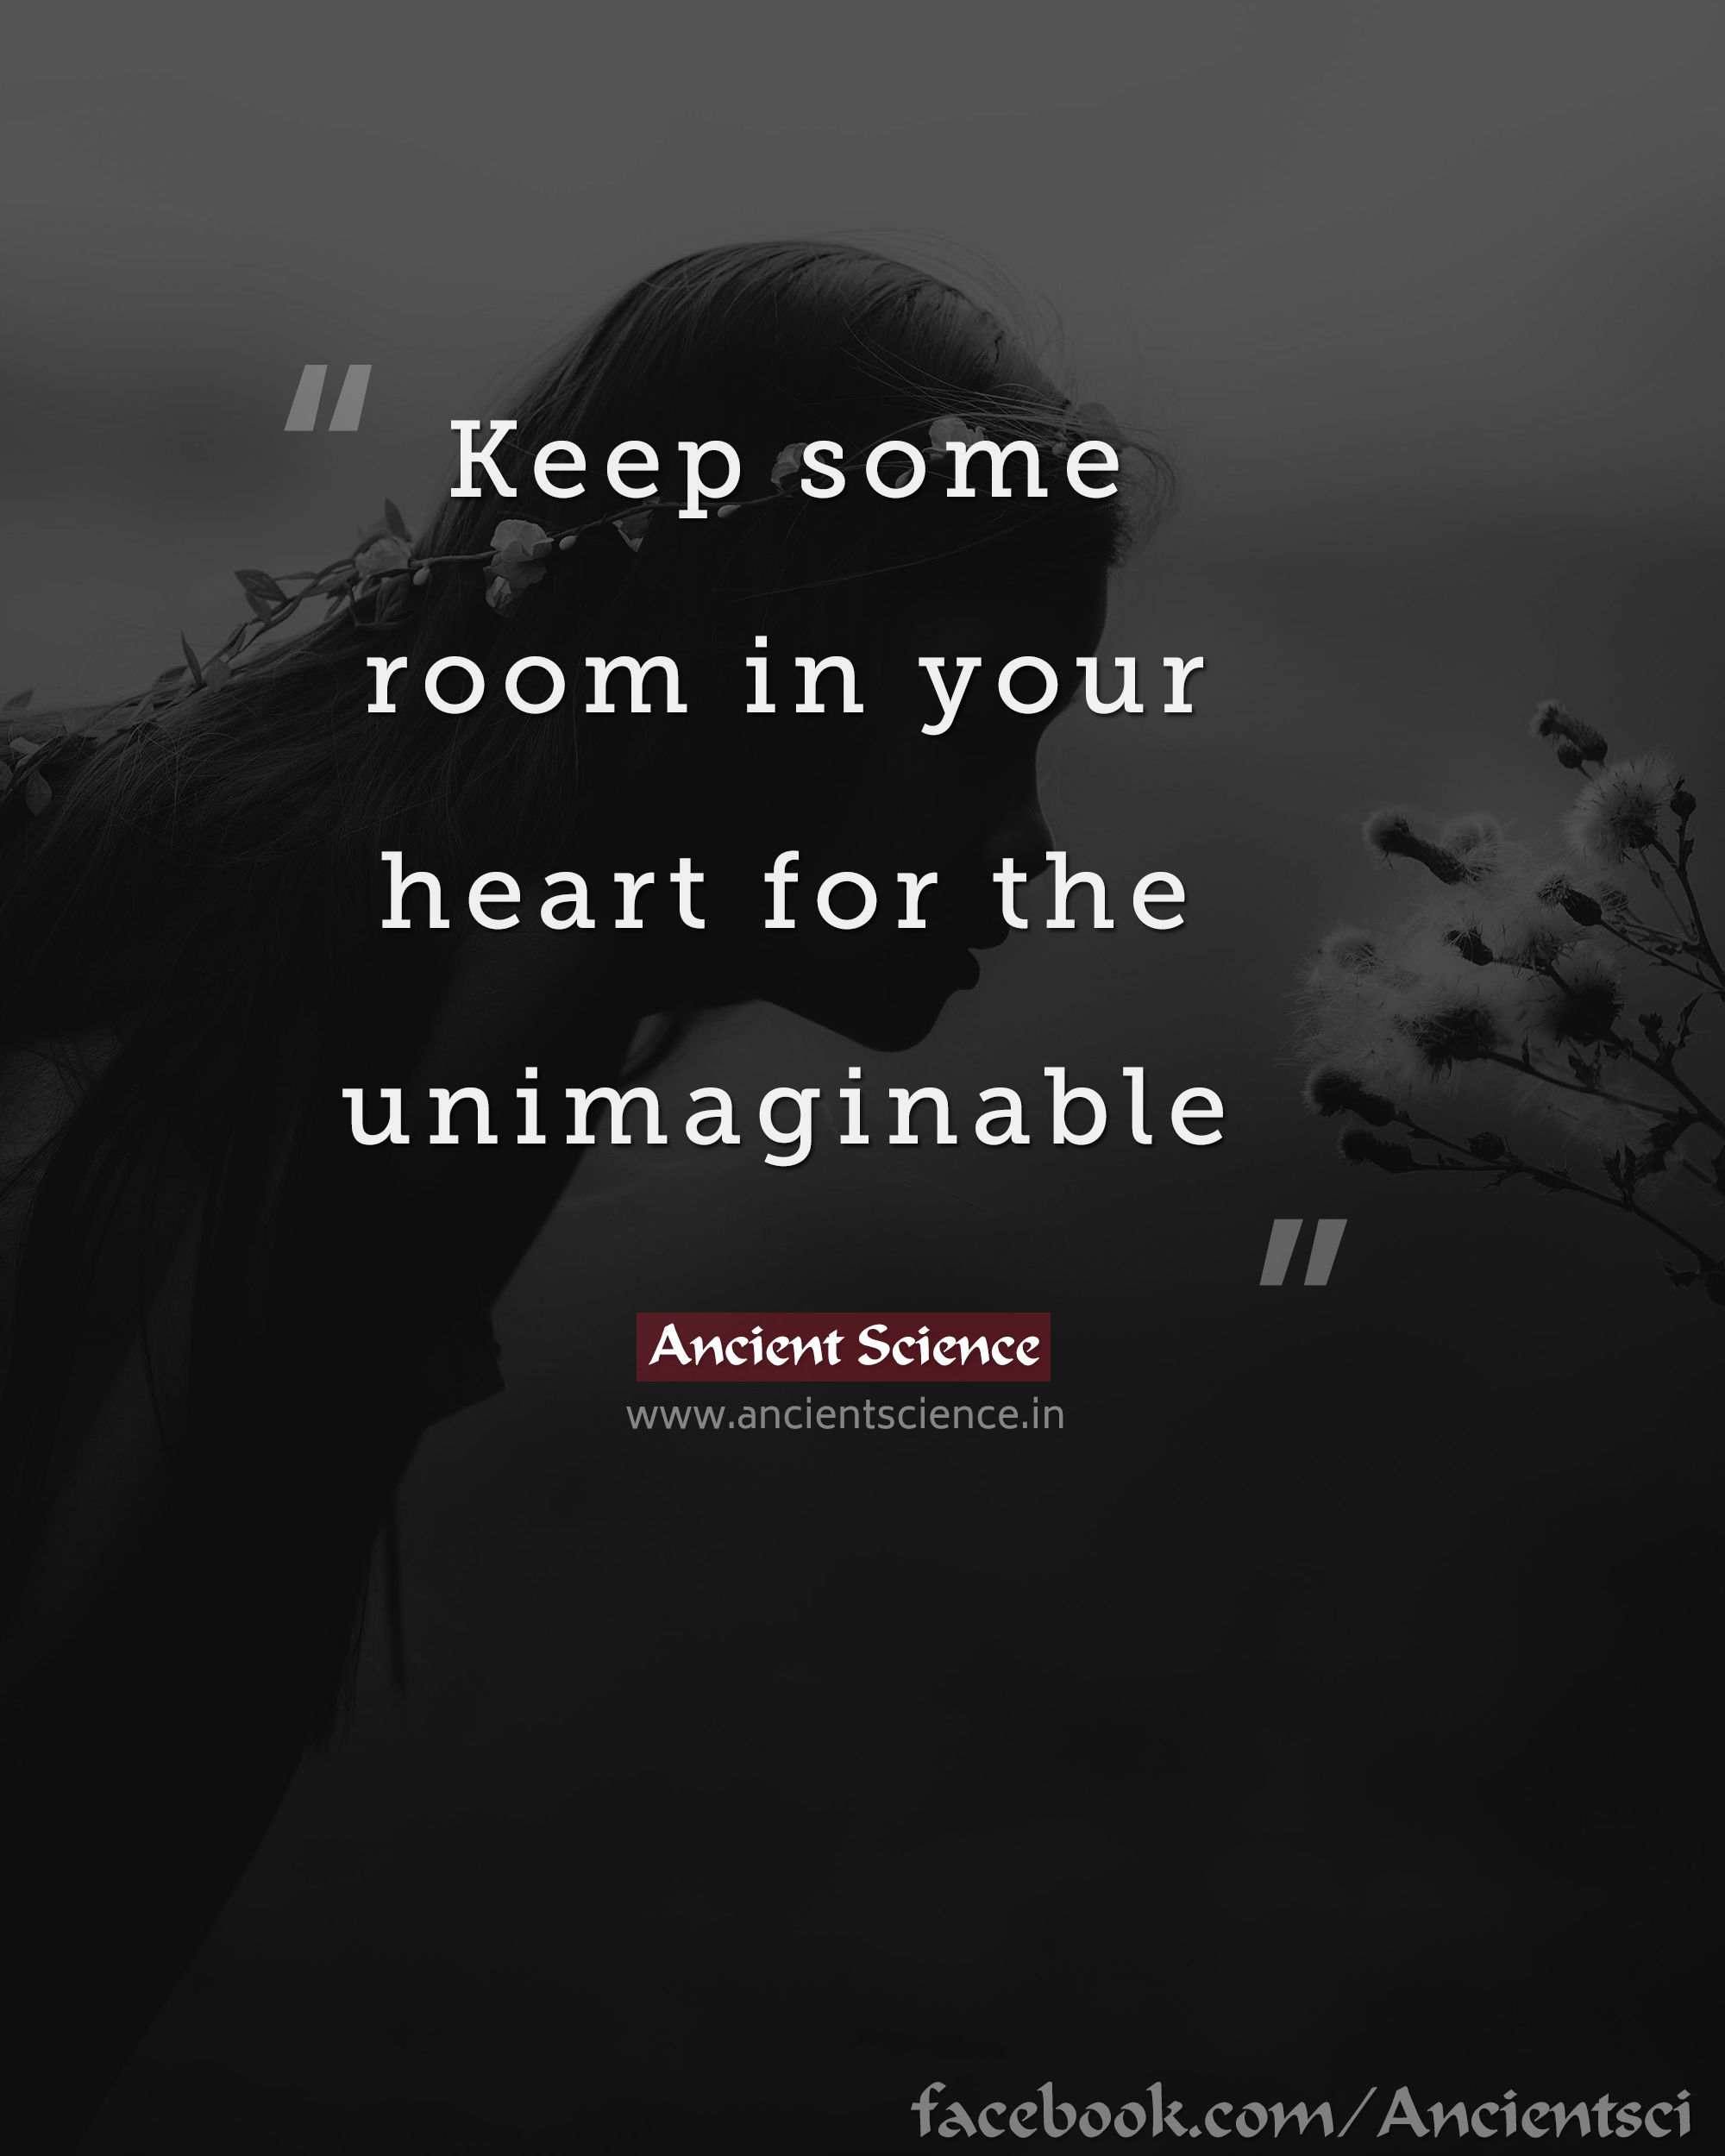 Keep some room in your heart for the unimaginable...